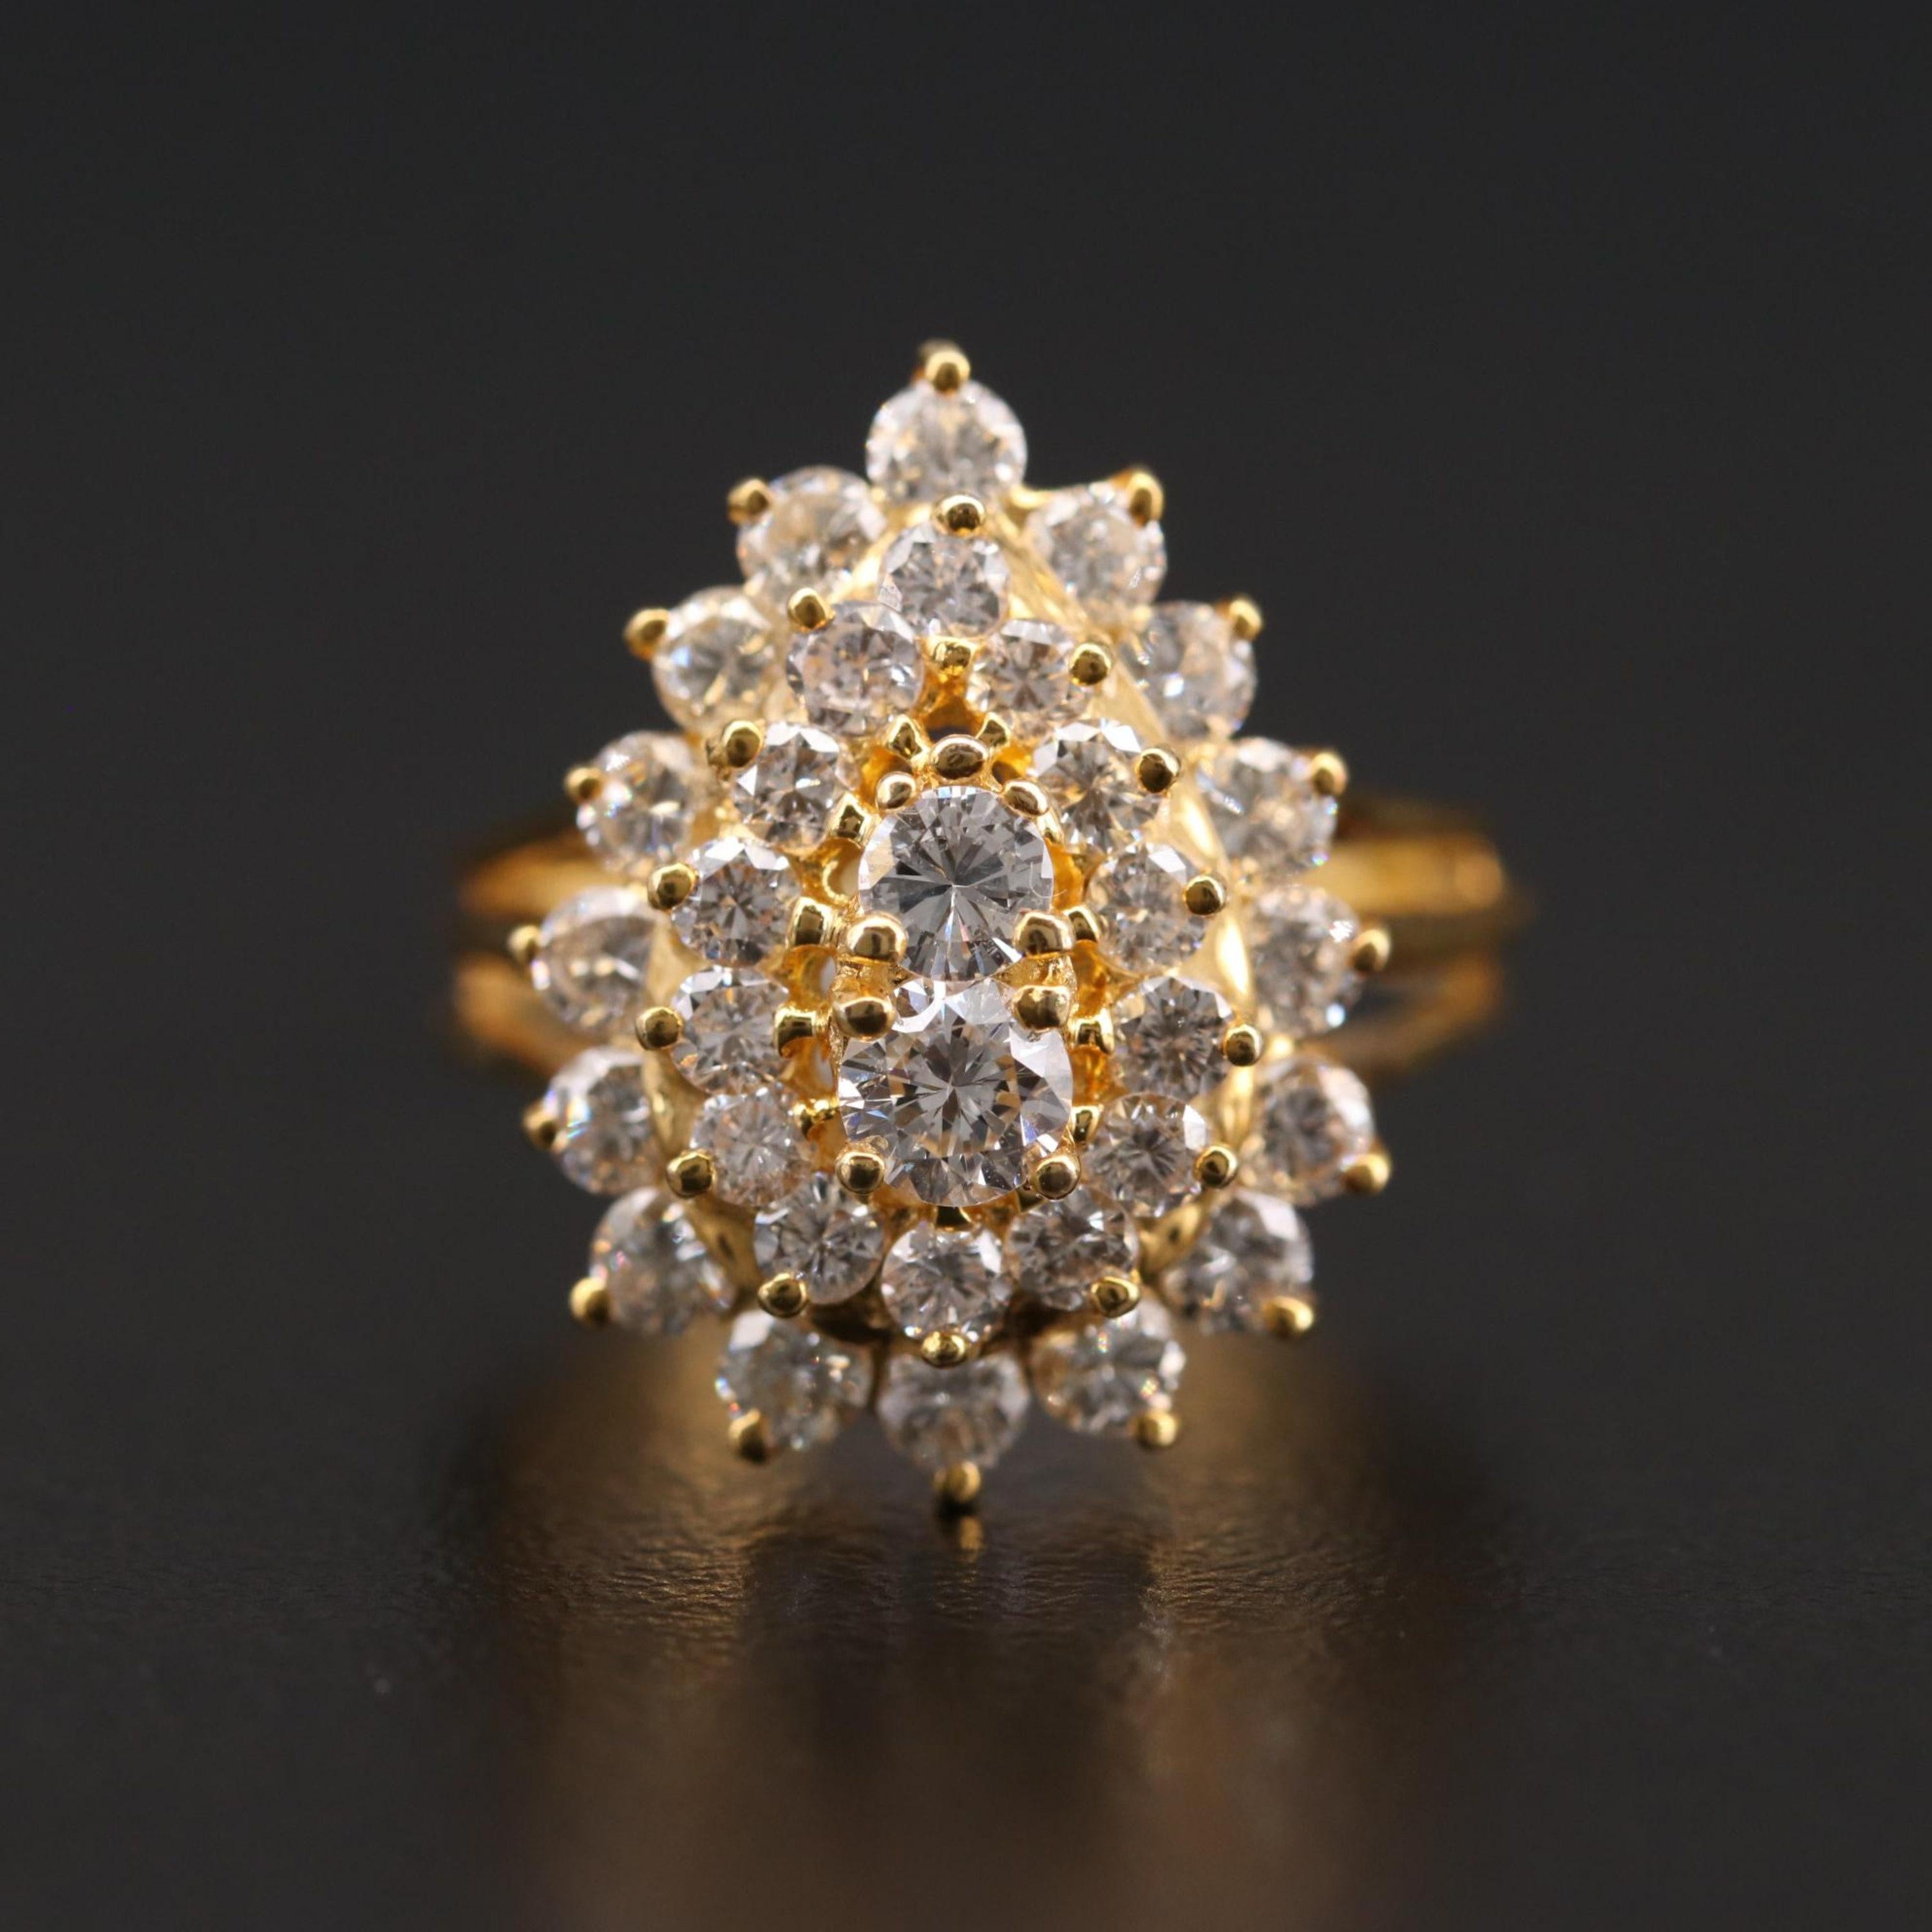 For Sale:  Pear Shaped Diamond Engagement Ring, Diamond Cluster Ring, Diamond Cocktail Ring 5